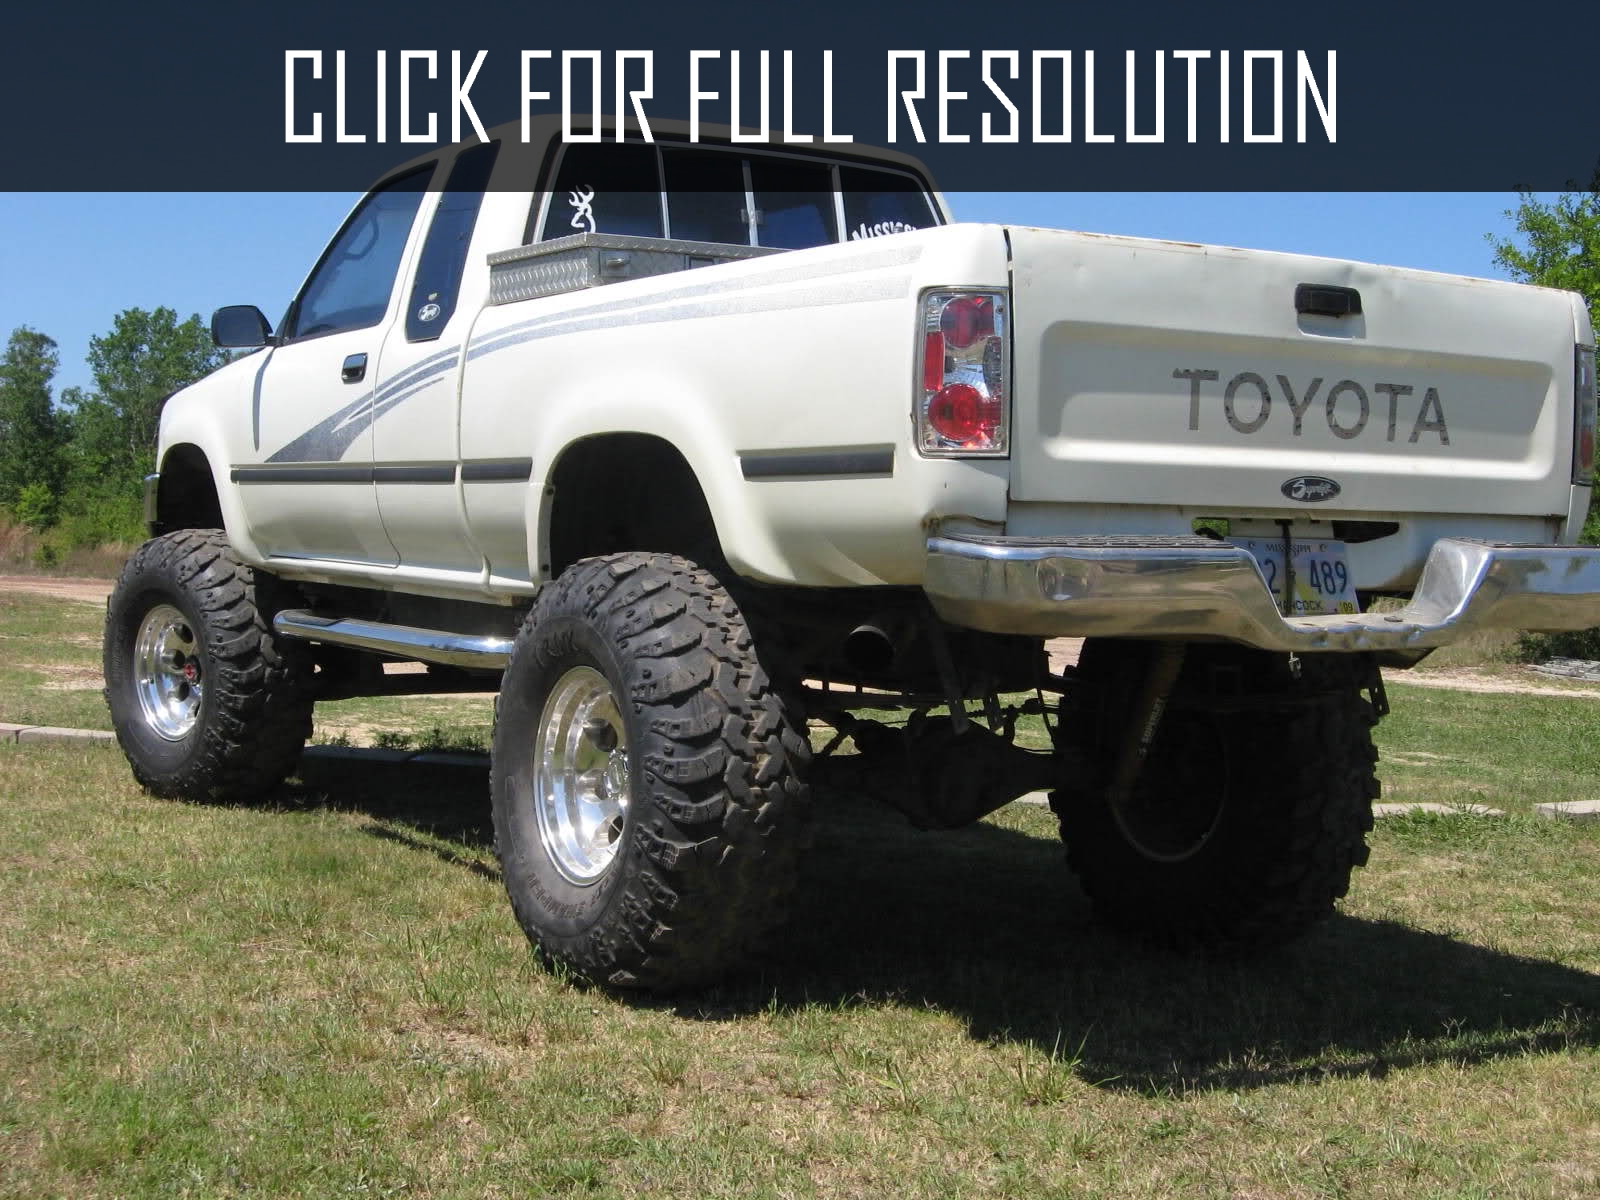 Toyota Truck Lifted